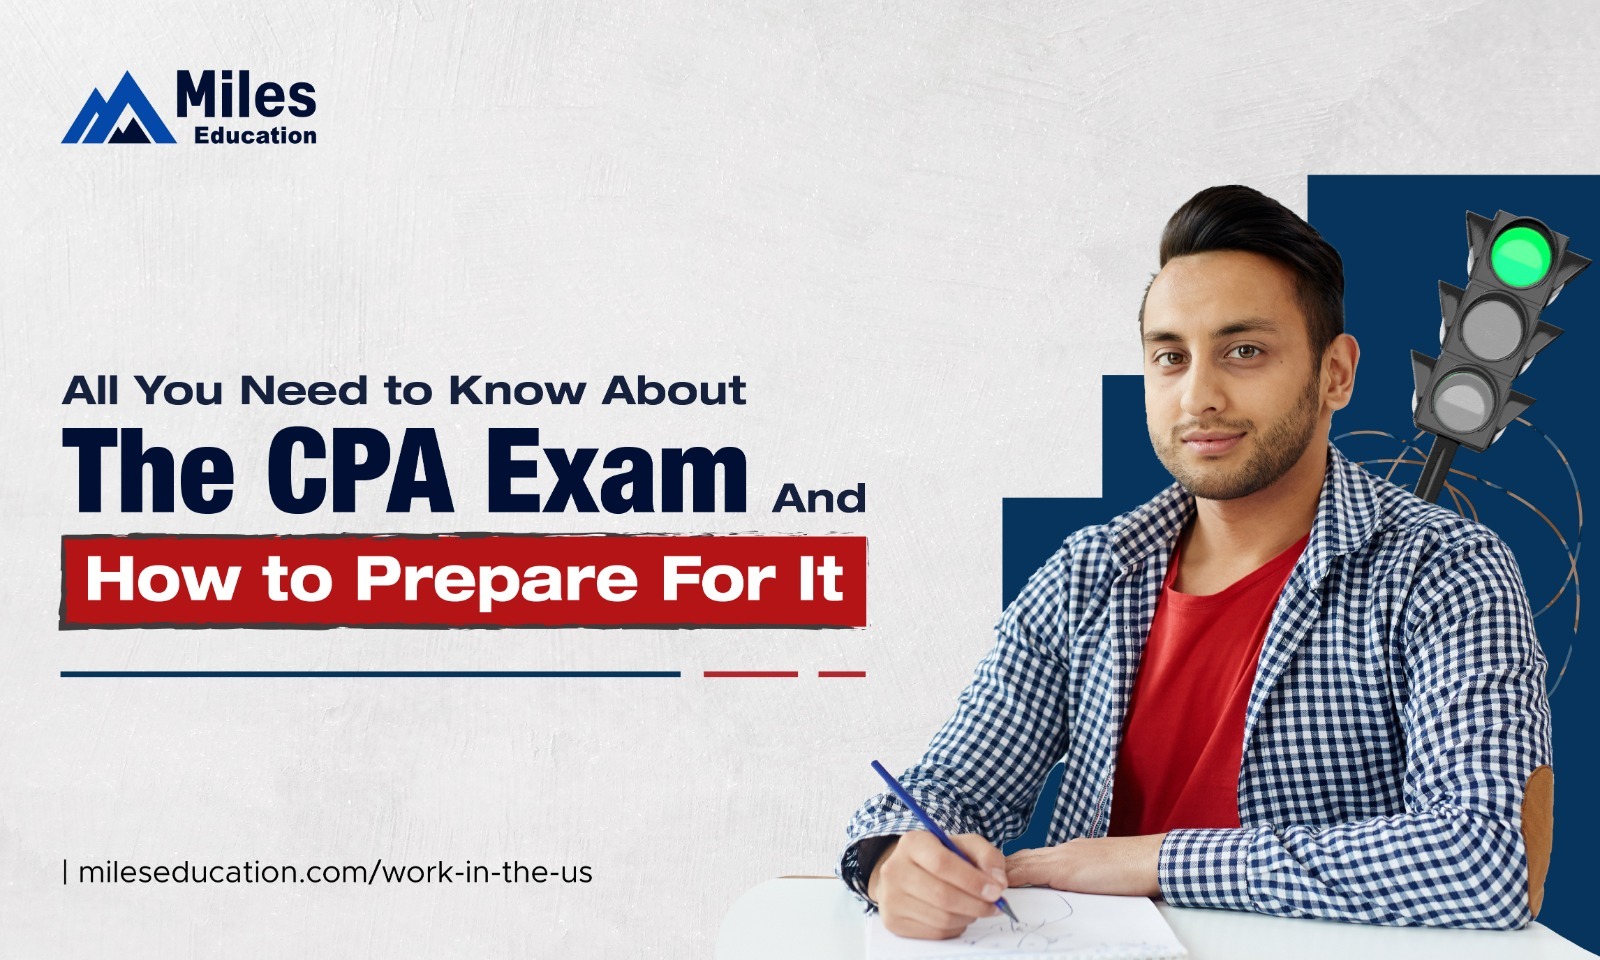 Preparation for the CPA exam